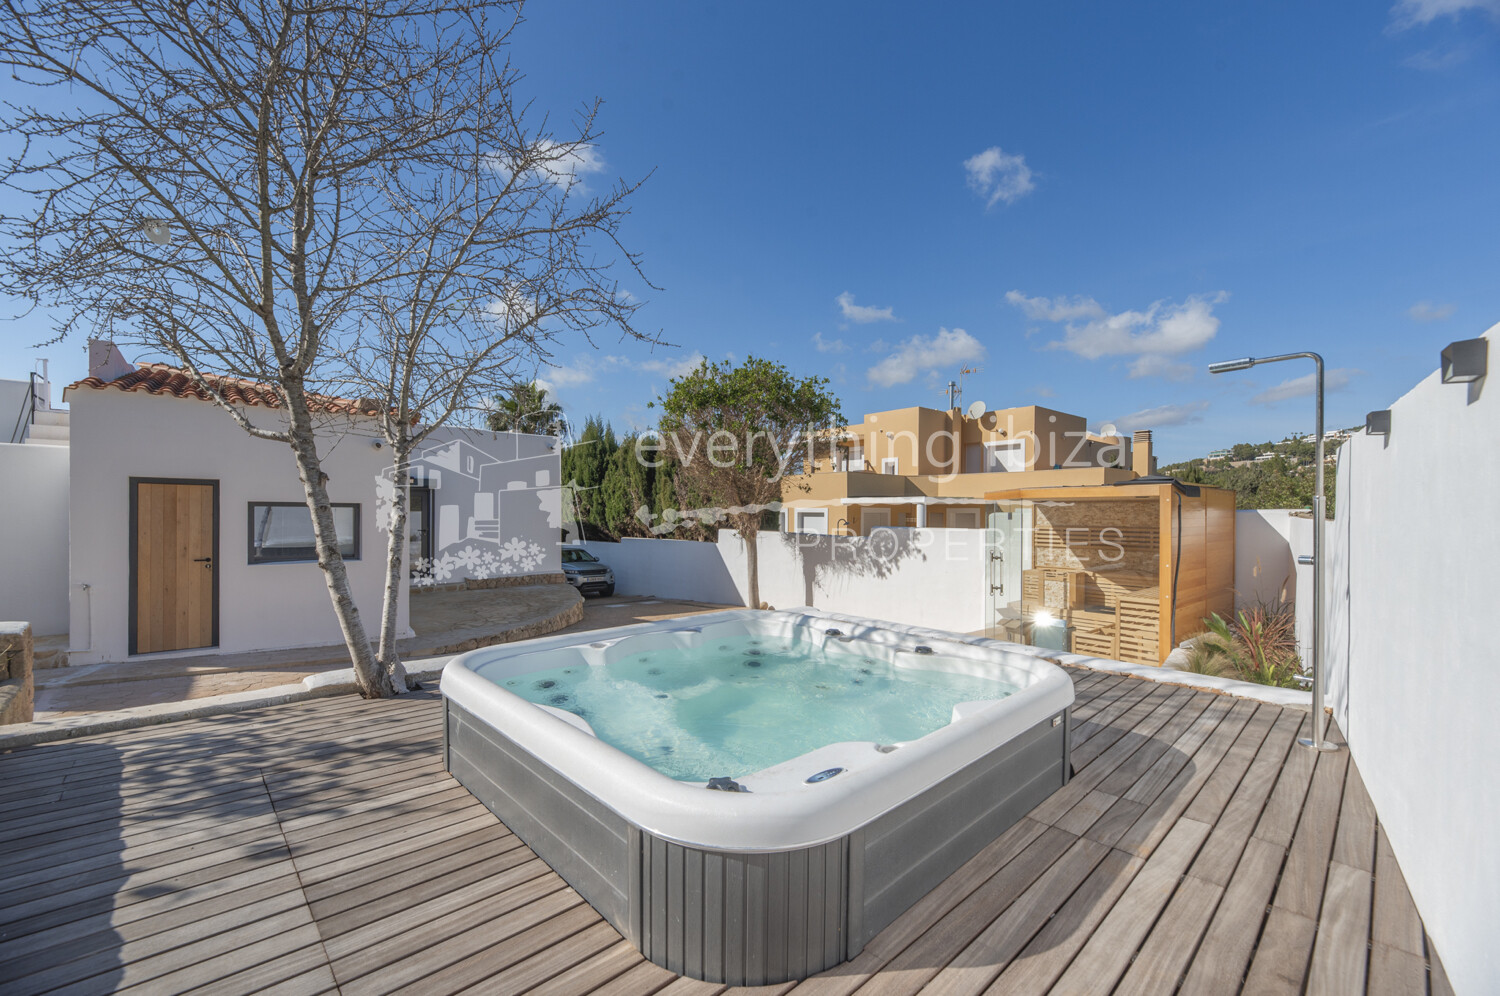 Beautiful Contemporary Villa Close to Cosmopolitan Village of Jesus, ref. 1681, for sale in Ibiza by everything ibiza Properties